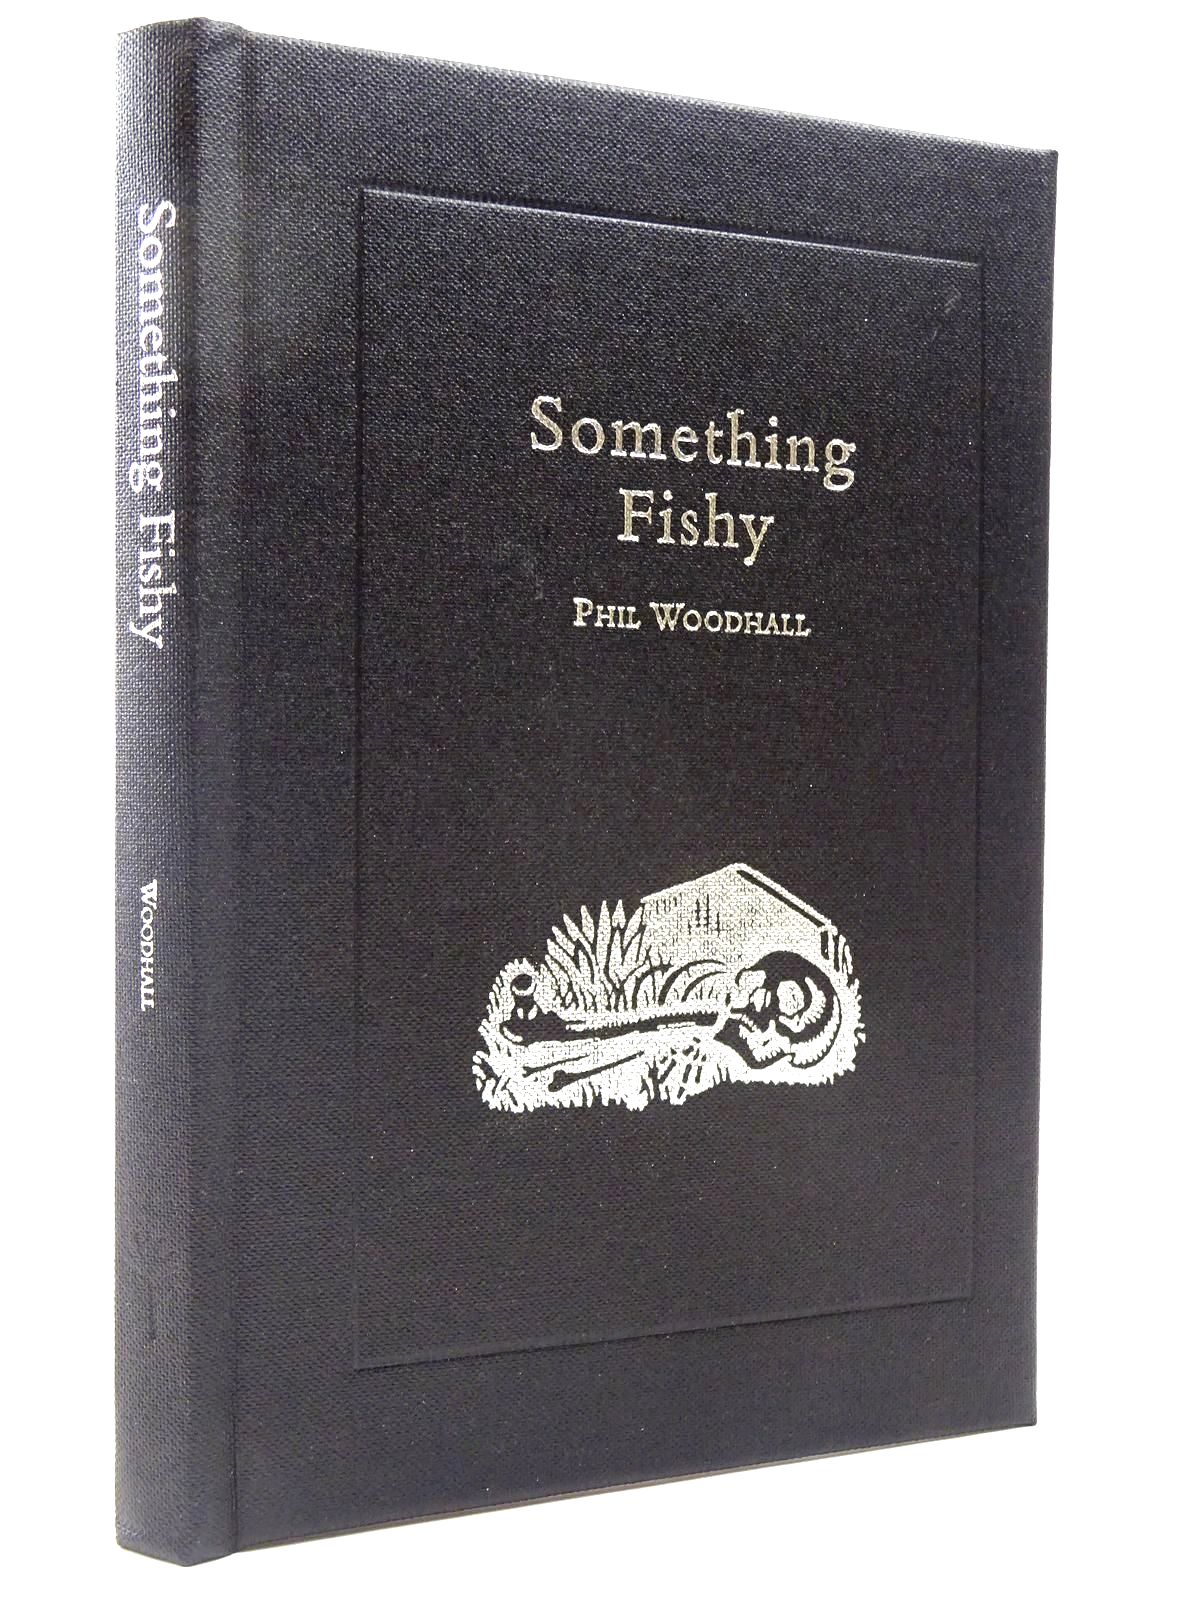 Photo of SOMETHING FISHY written by Woodhall, Phil published by The Medlar Press (STOCK CODE: 2129498)  for sale by Stella & Rose's Books